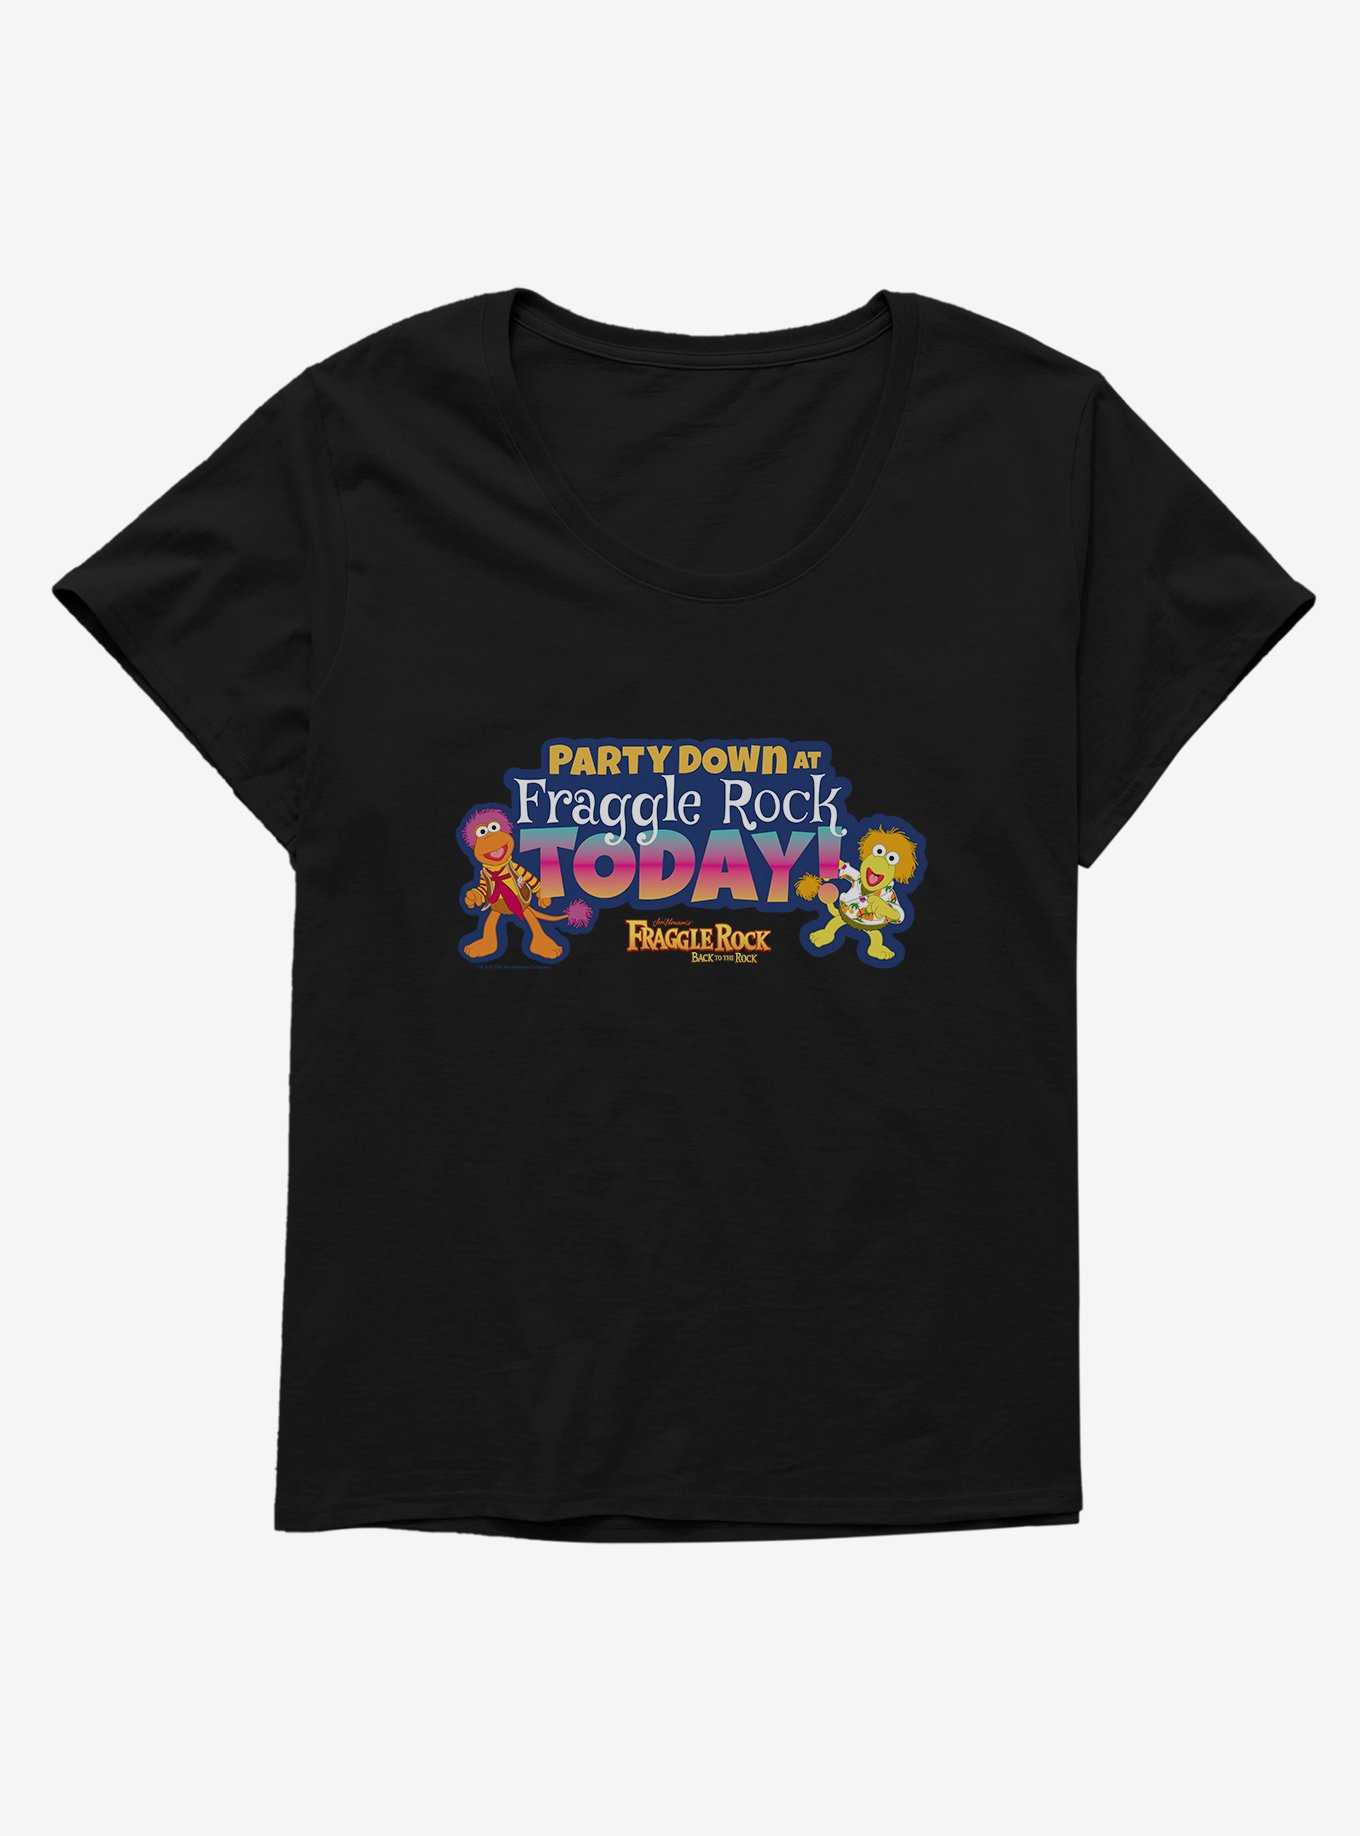 Fraggle Rock Back To The Rock Party Down Girls T-Shirt Plus Size, , hi-res